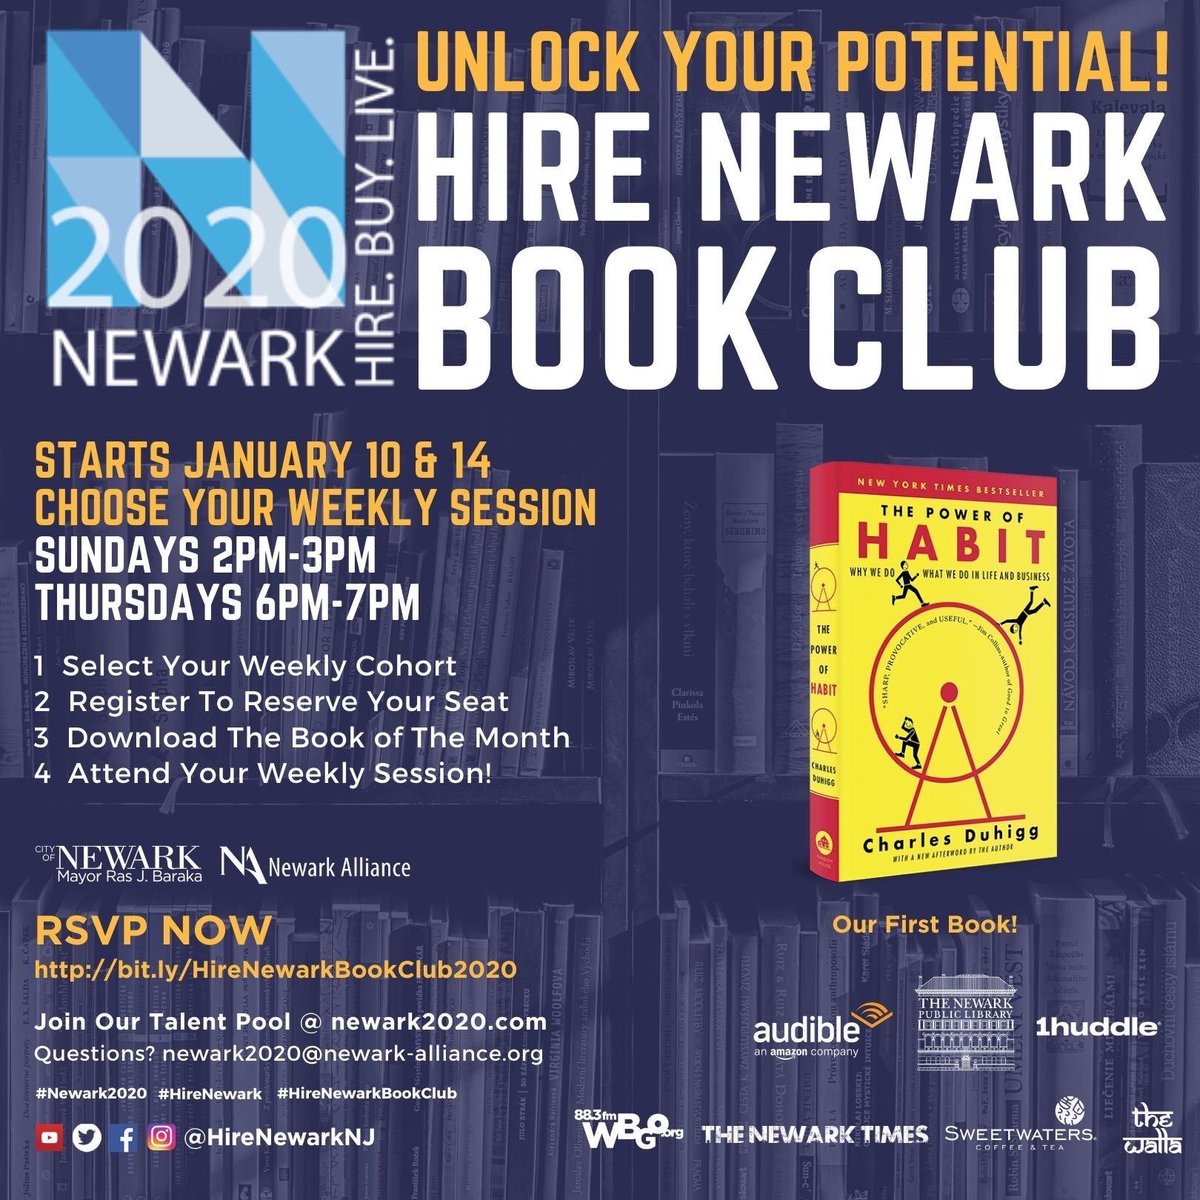 JOIN NEWARK 2020's HIRE NEWARK BOOK CLUB and UNLOCK YOUR POTENTIAL! STARTS SUN 1/10 at 2PM & THUR 1/14 at 6PM. Moderated by our High-Performance Career Coaches! WE’RE READING - The Power of Habit
RSVP NOW! bit.ly/HireNewarkBook…
#Newark2020 #HireNewark #HireNewarkBookClub